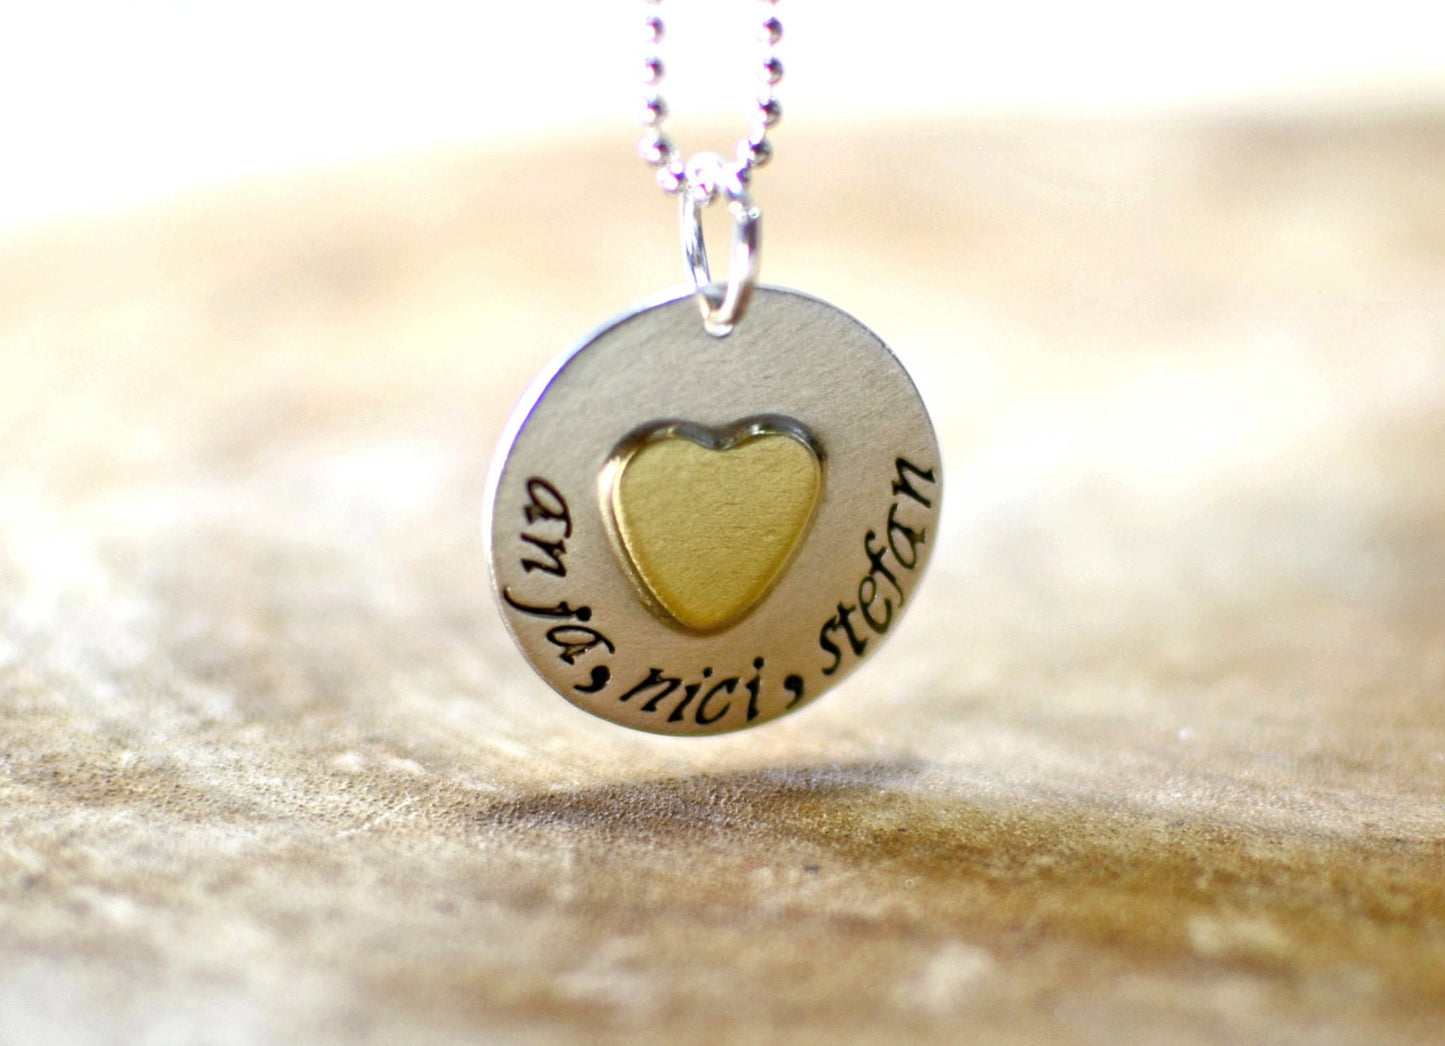 Personalized sterling silver love charm necklace